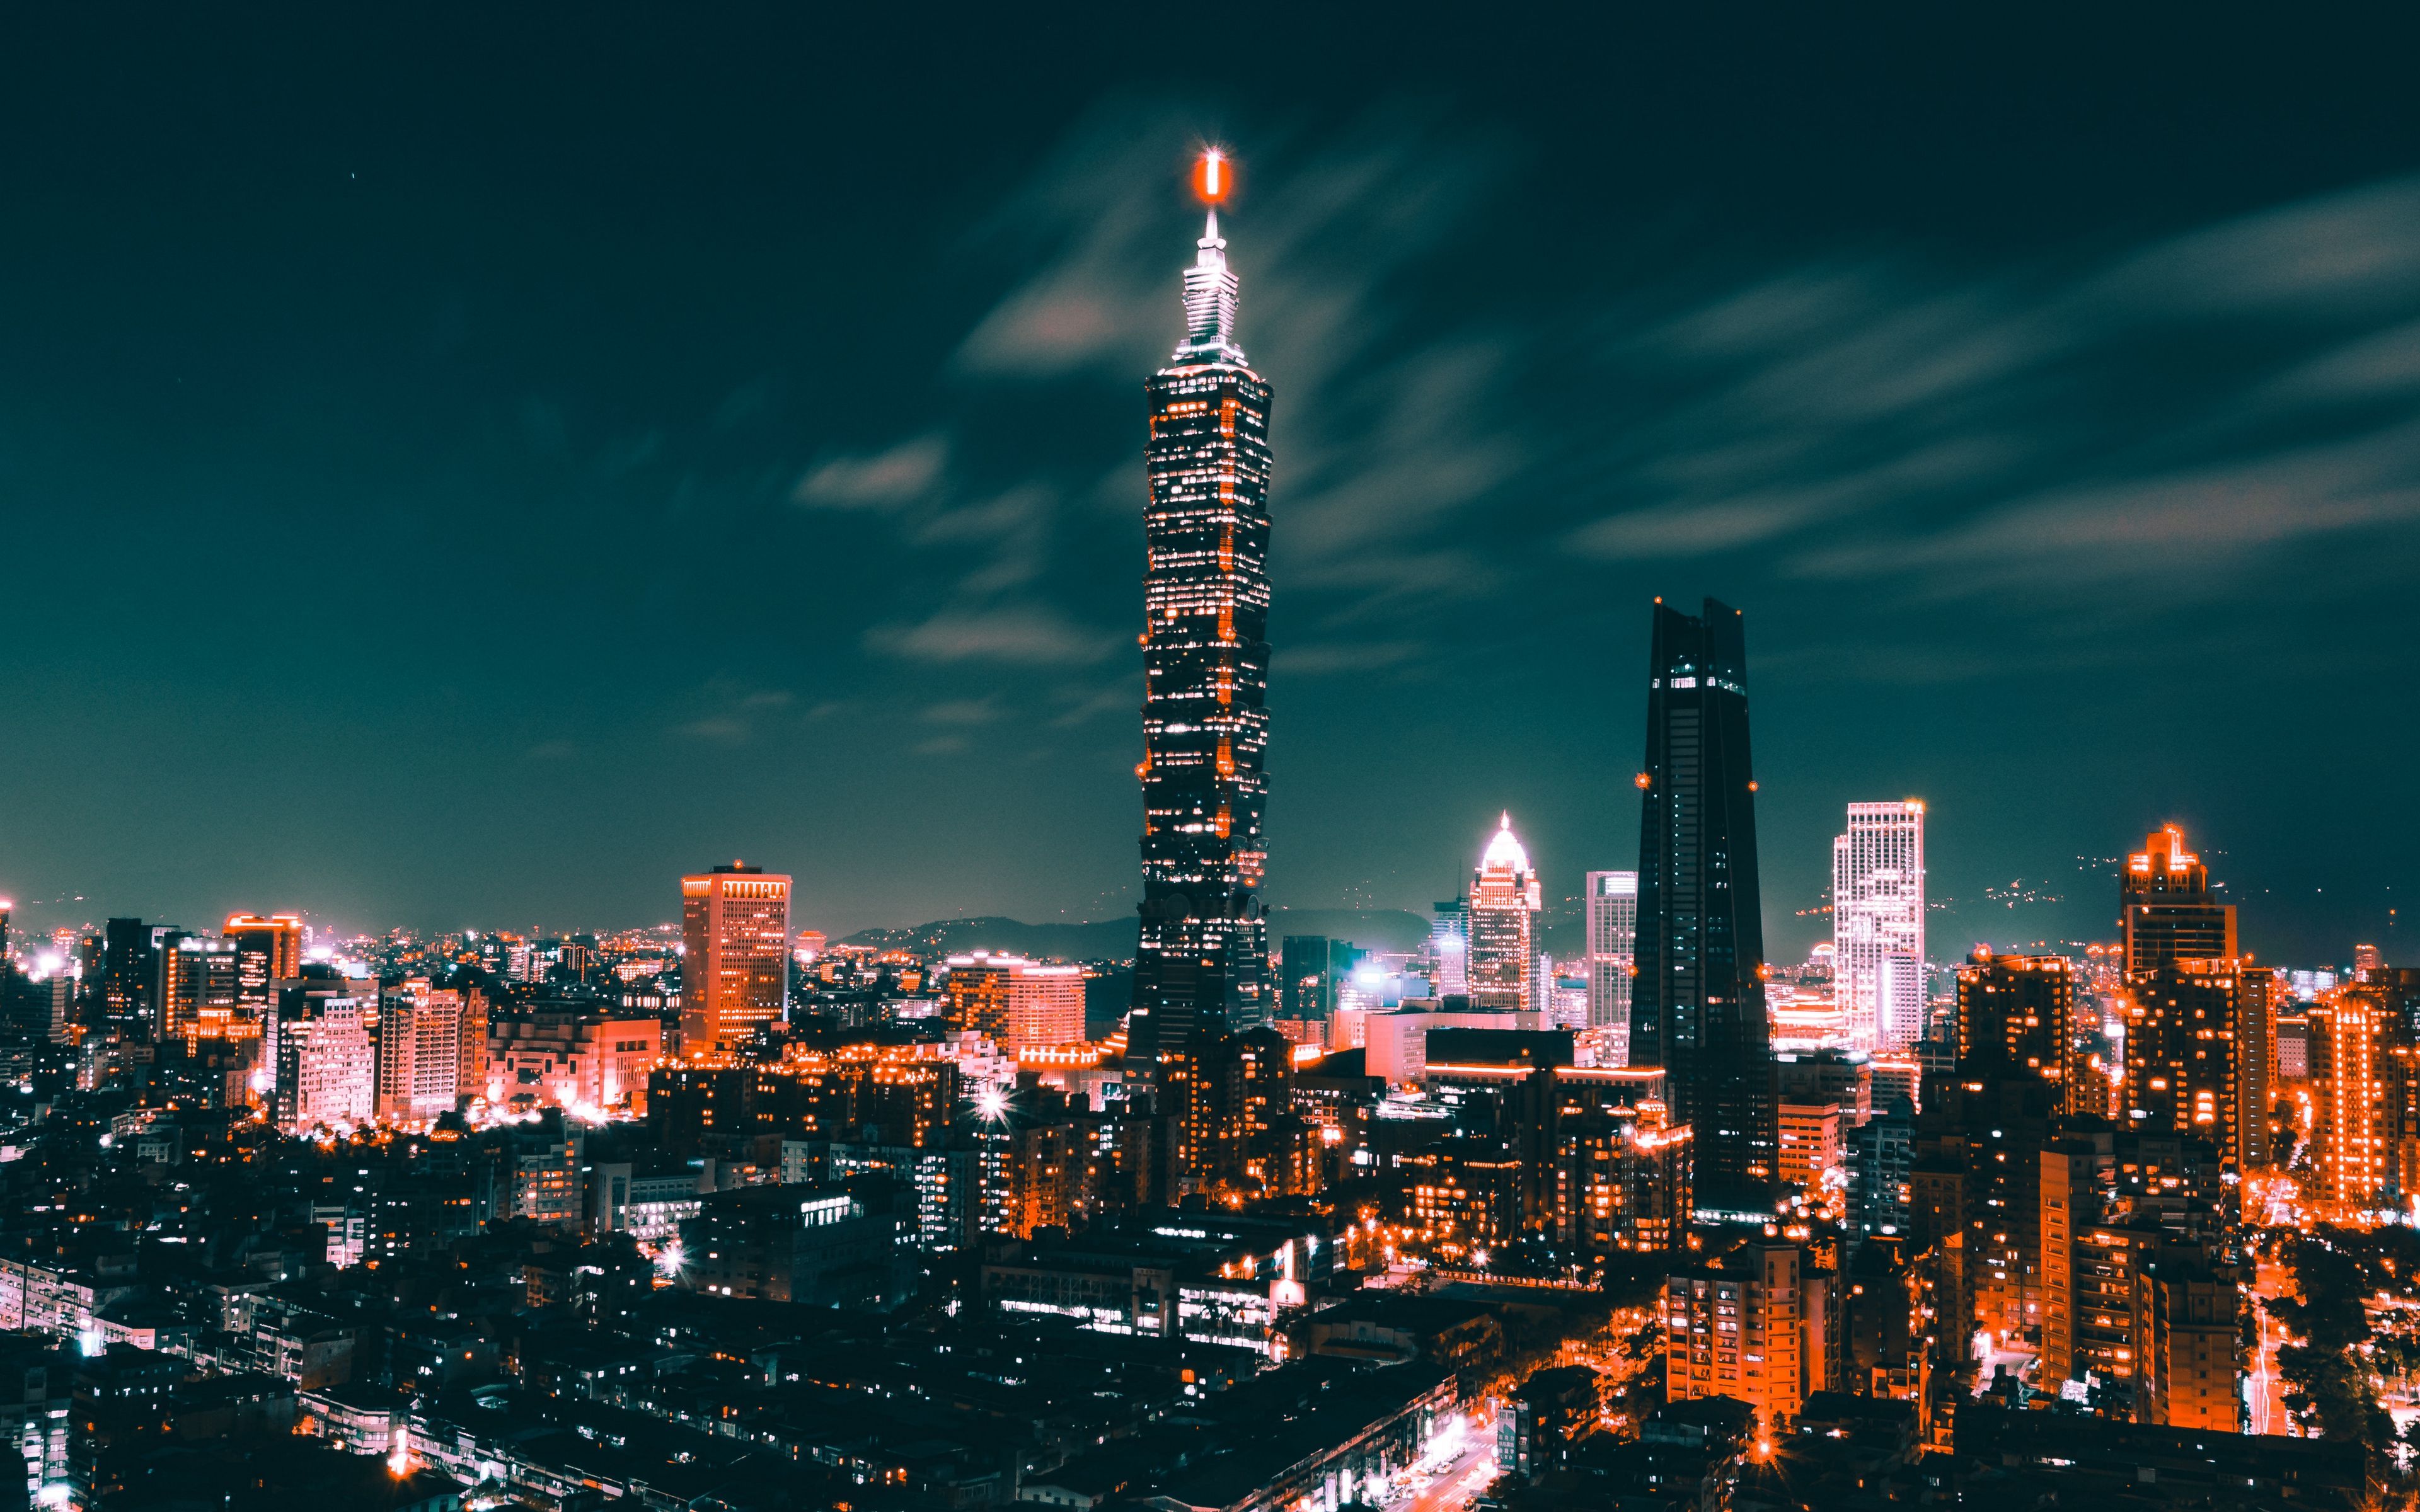 Download wallpaper 3840x2400 night city, city lights, skyscrapers, top view, taiwan 4k ultra HD 16:10 HD background